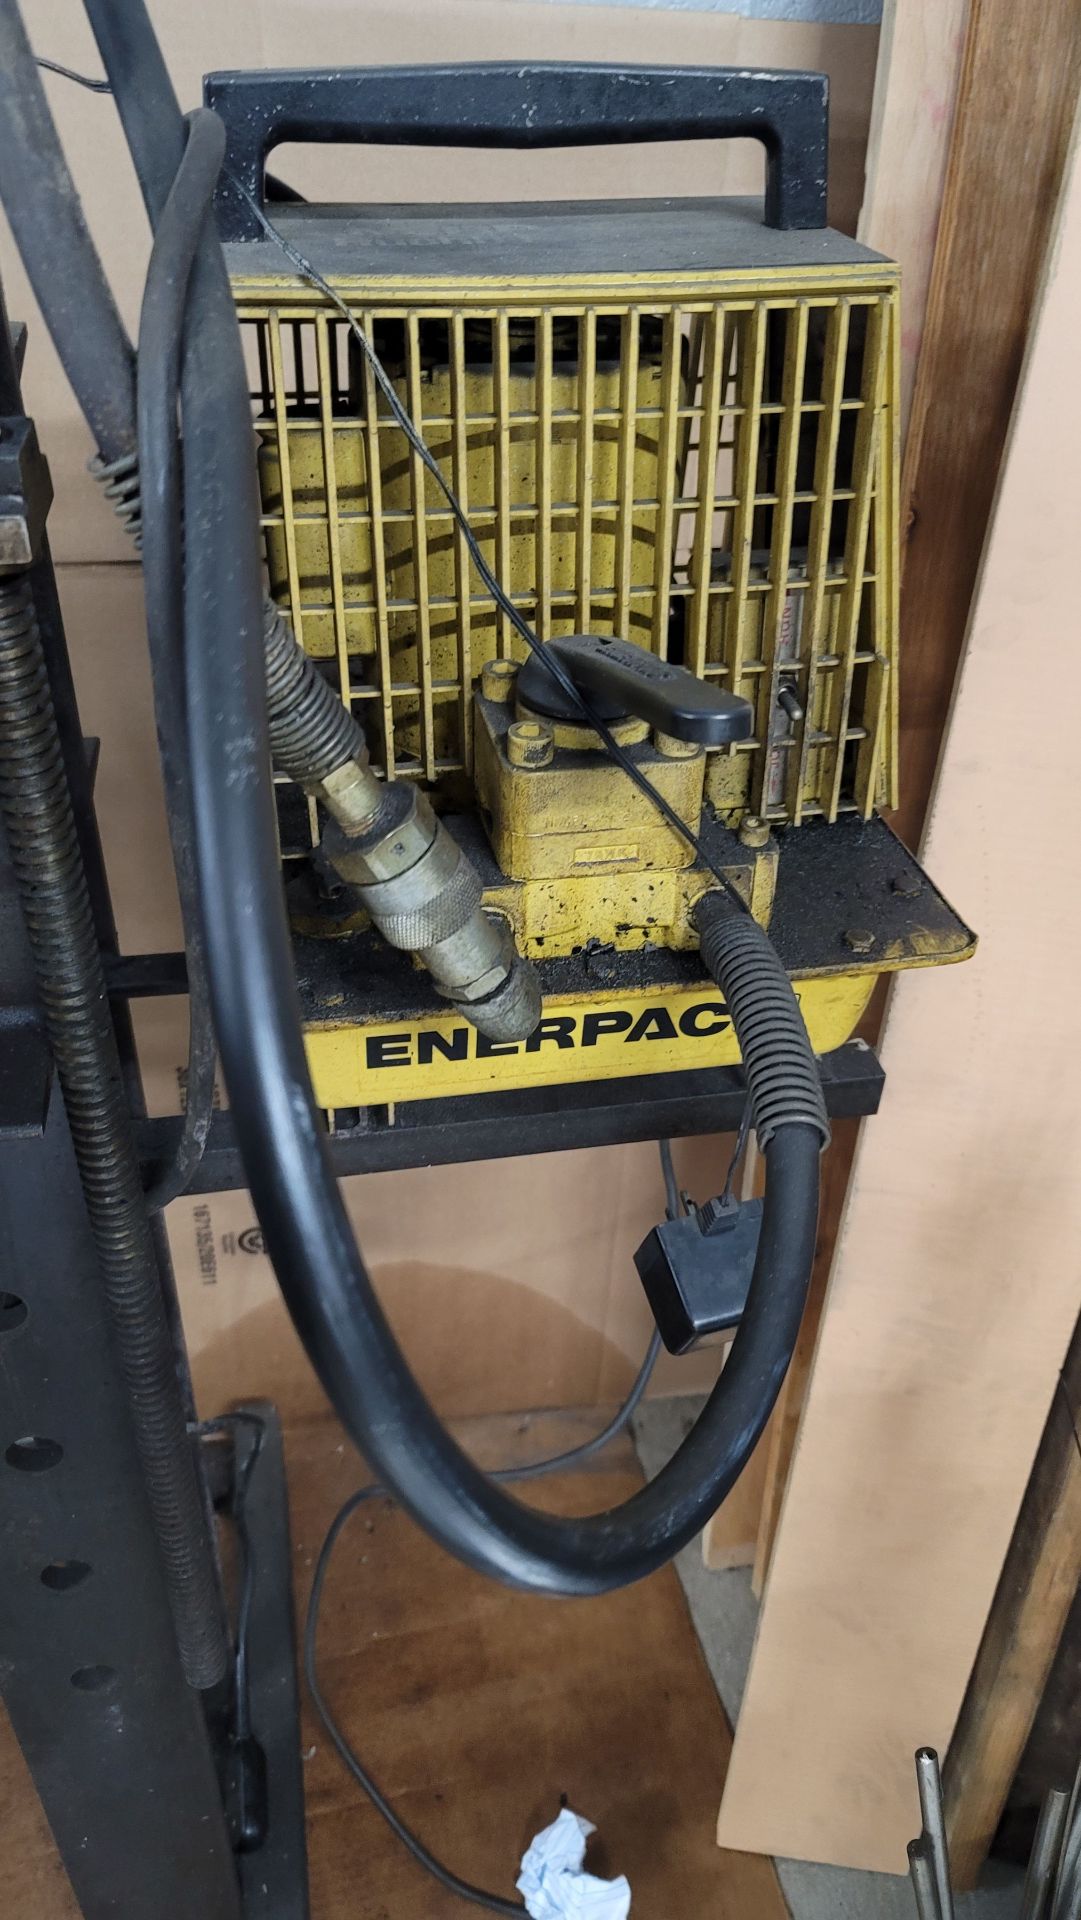 H-FRAME SHOP PRESS, W/ ENERPAC PER1541 HUSHH-PUP HYDRAULIC PUMP & RAM, DISTANCE BETWEEN UPRIGHTS: - Image 4 of 10